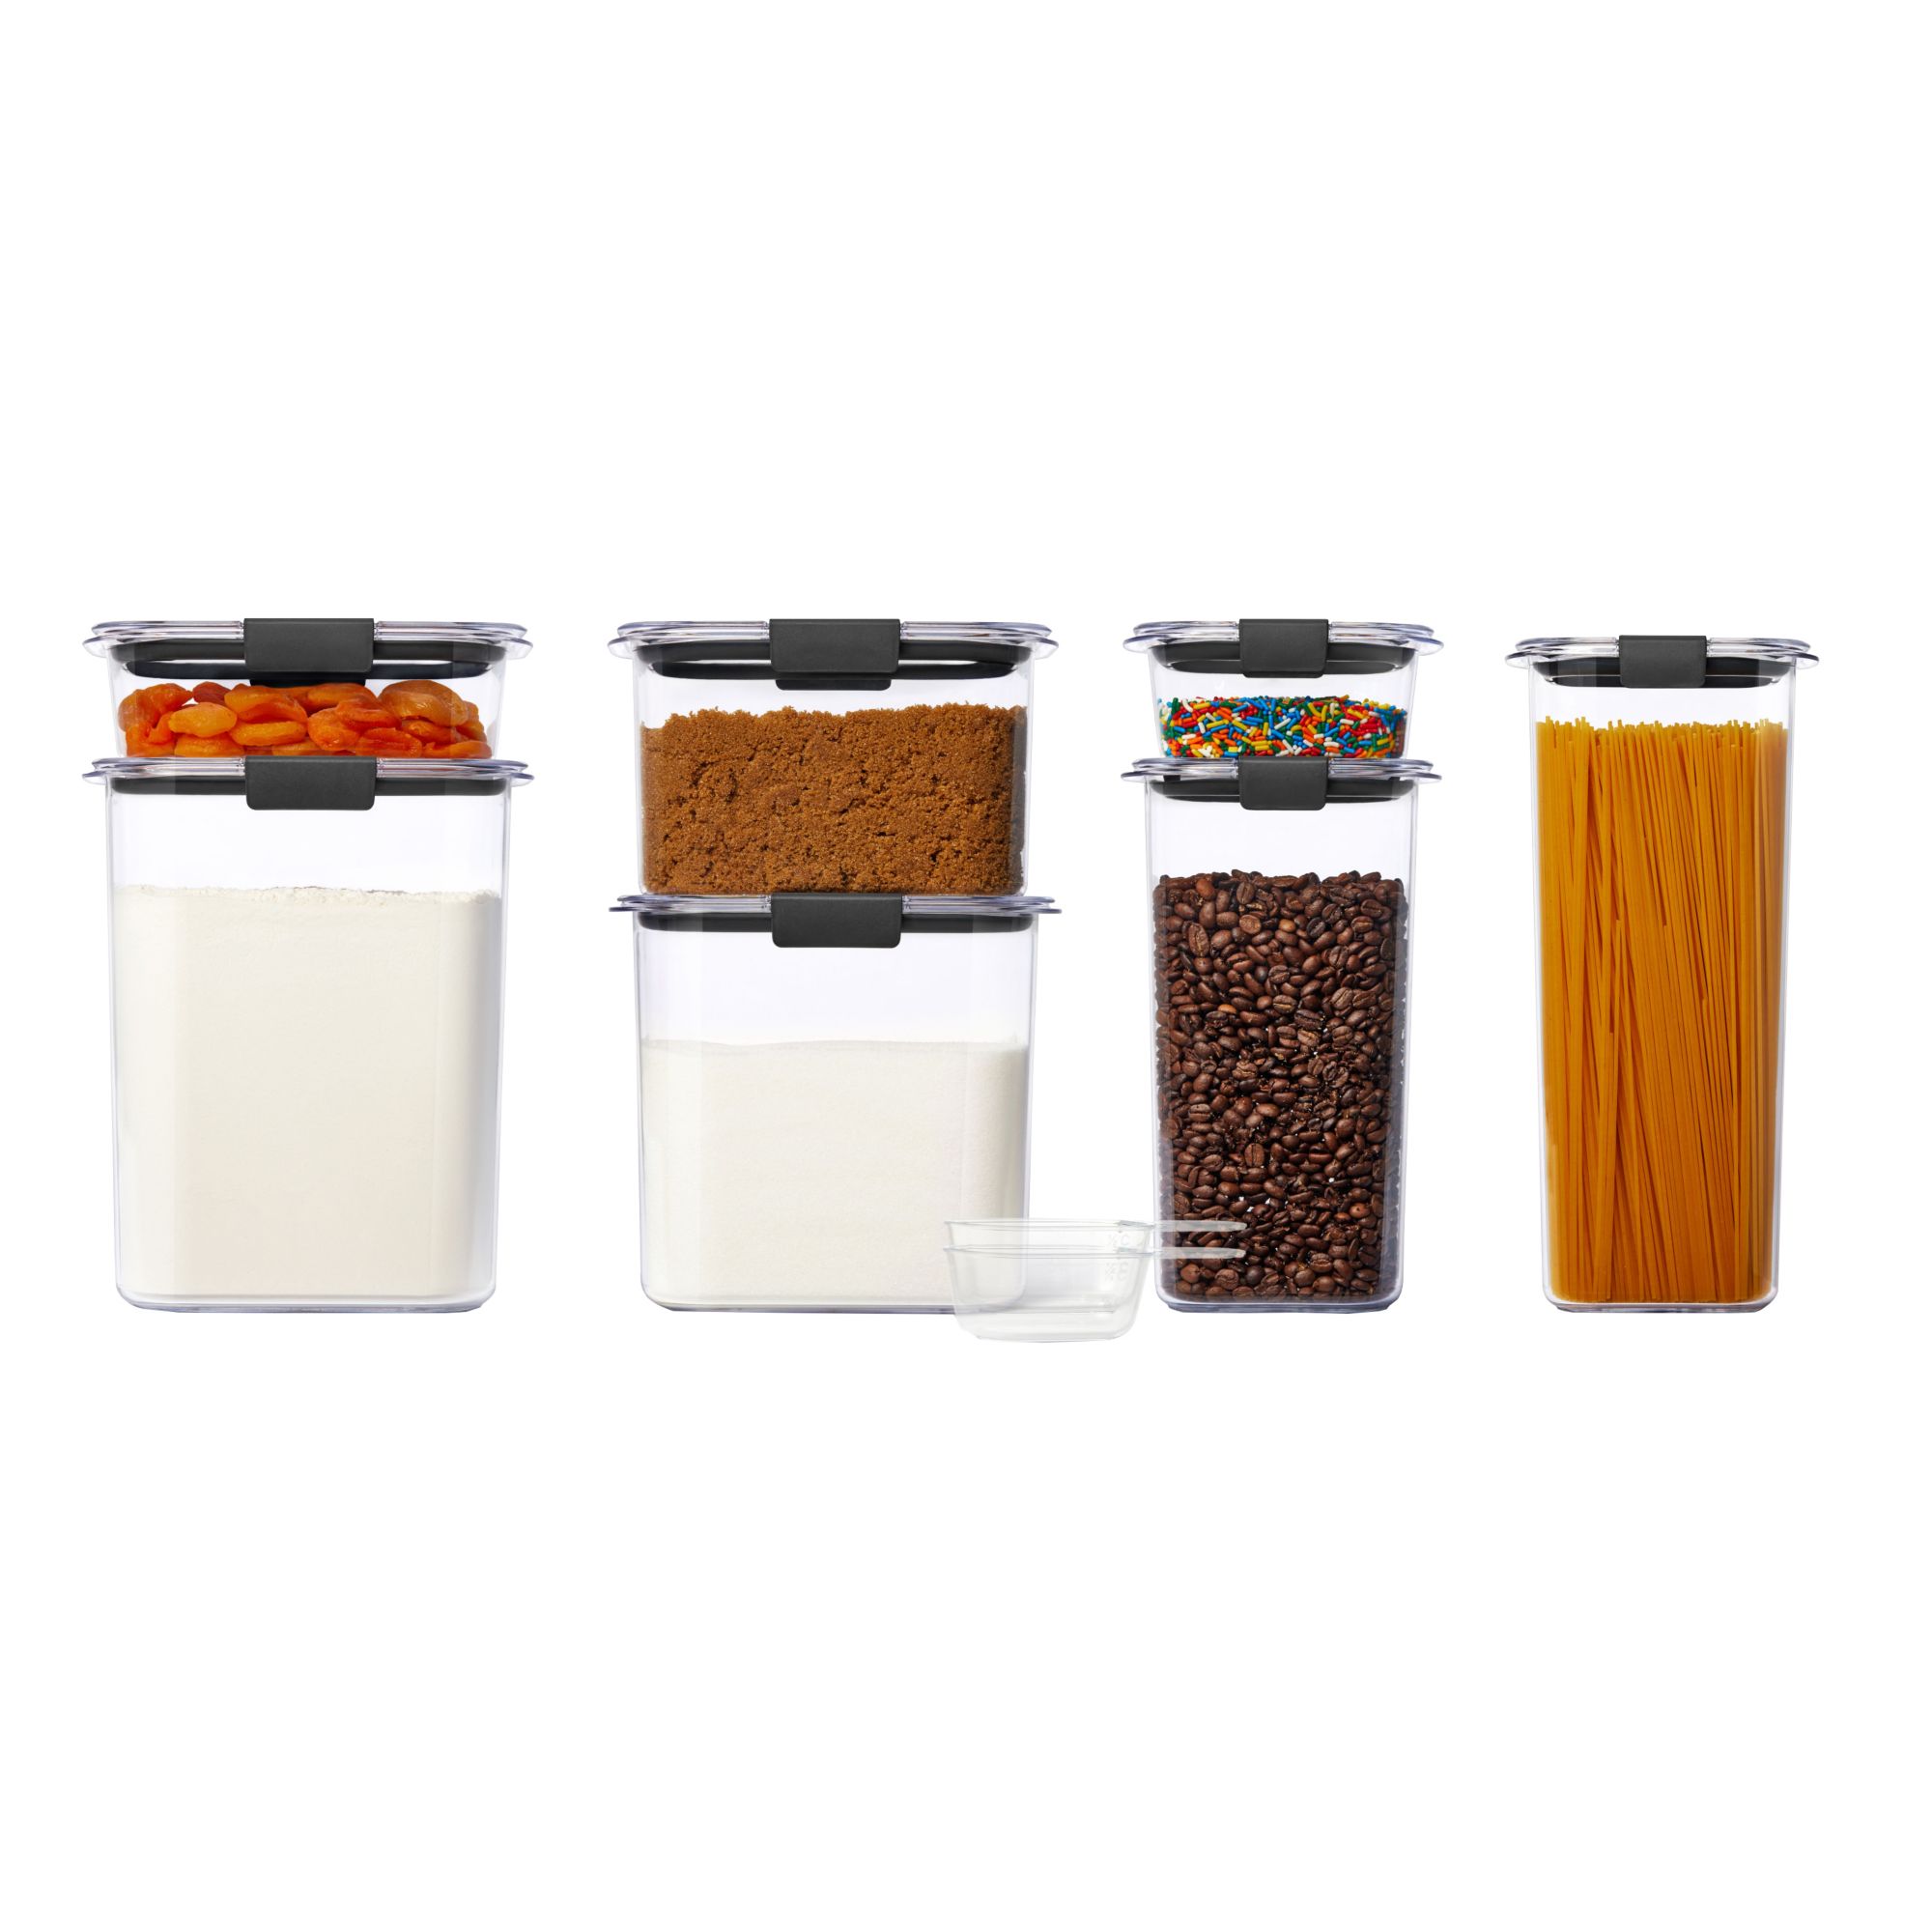 14-Piece Airtight Food Storage Containers Set with Lids for Flour, Sug